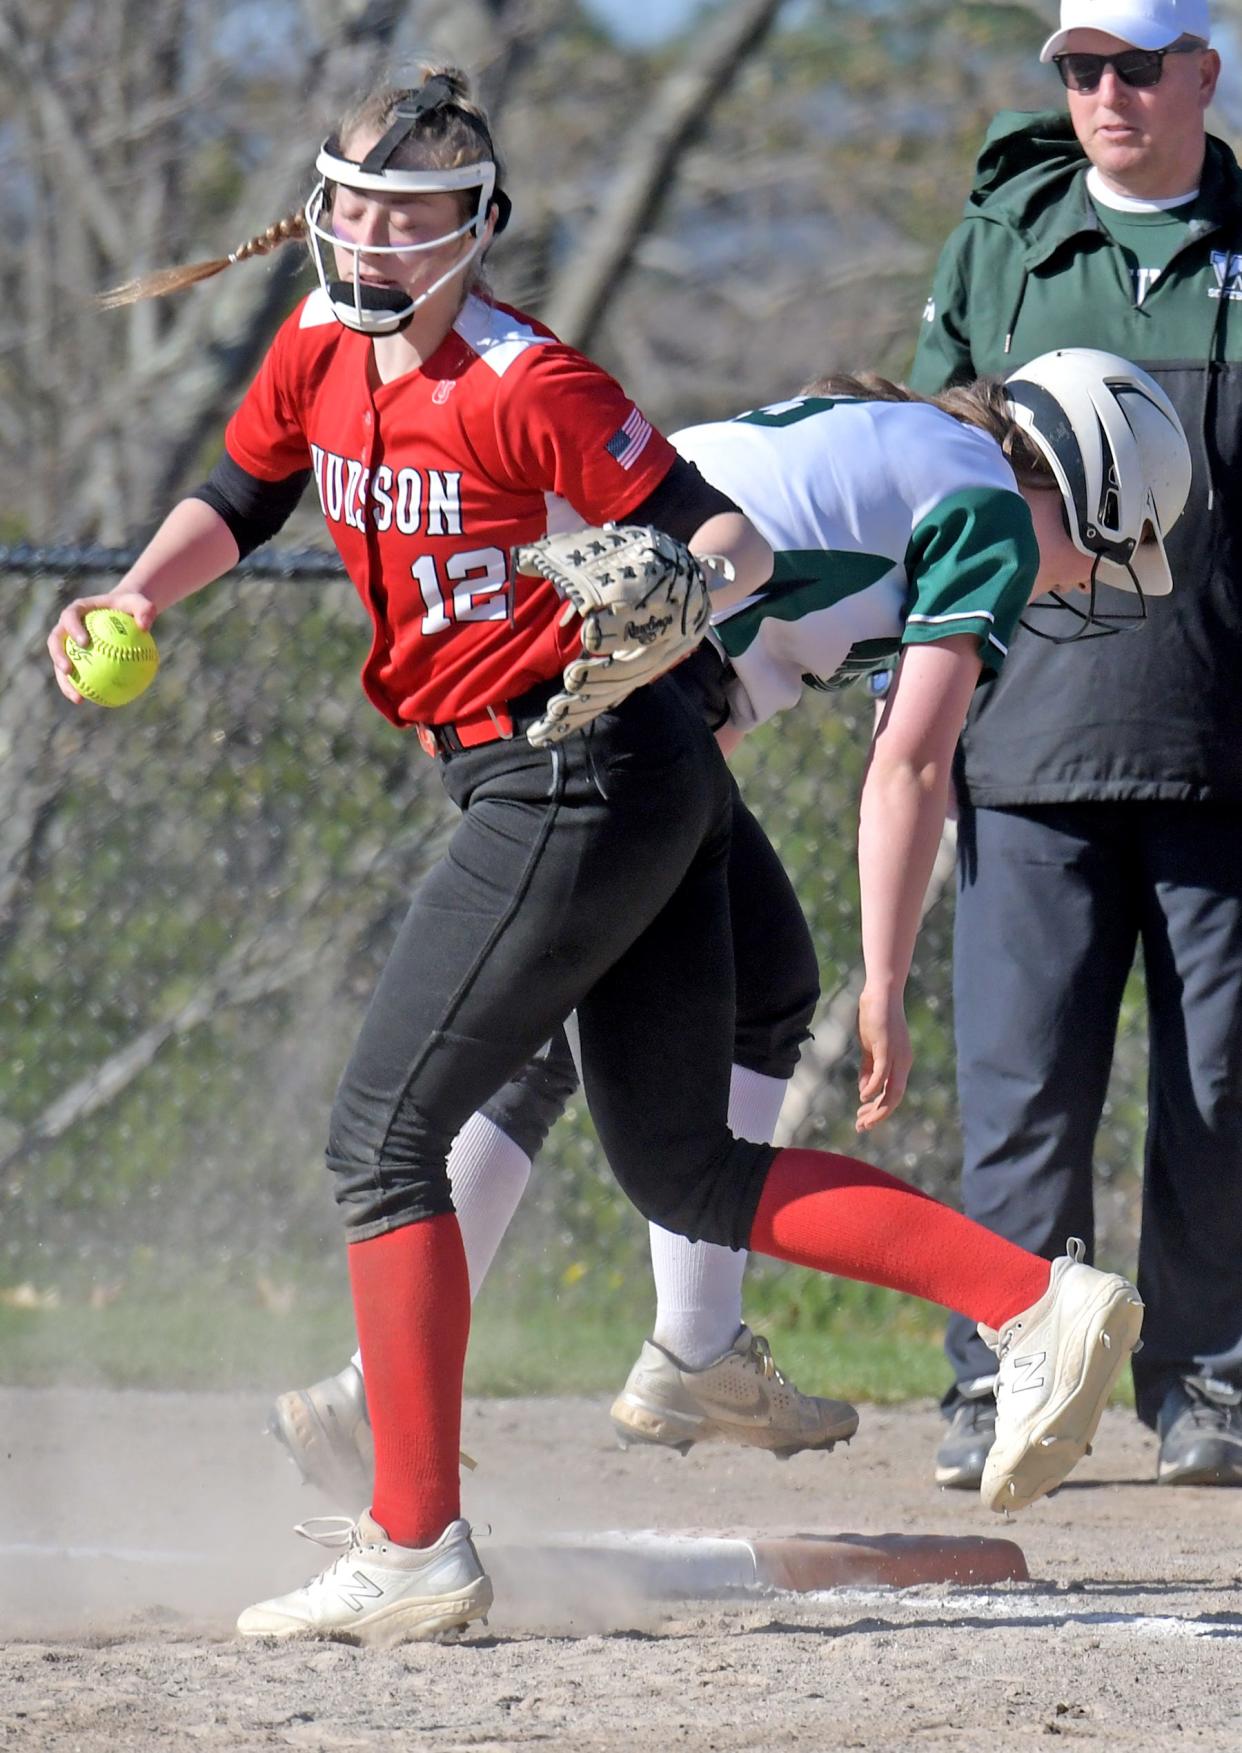 Wachusett's Riley Quirk is doubled up at first base by Hudson's Samantha Collette, after Wachusett's Gracie Granger lined out to Hudson centerfielder Sarah Korowski, who turned the double play.